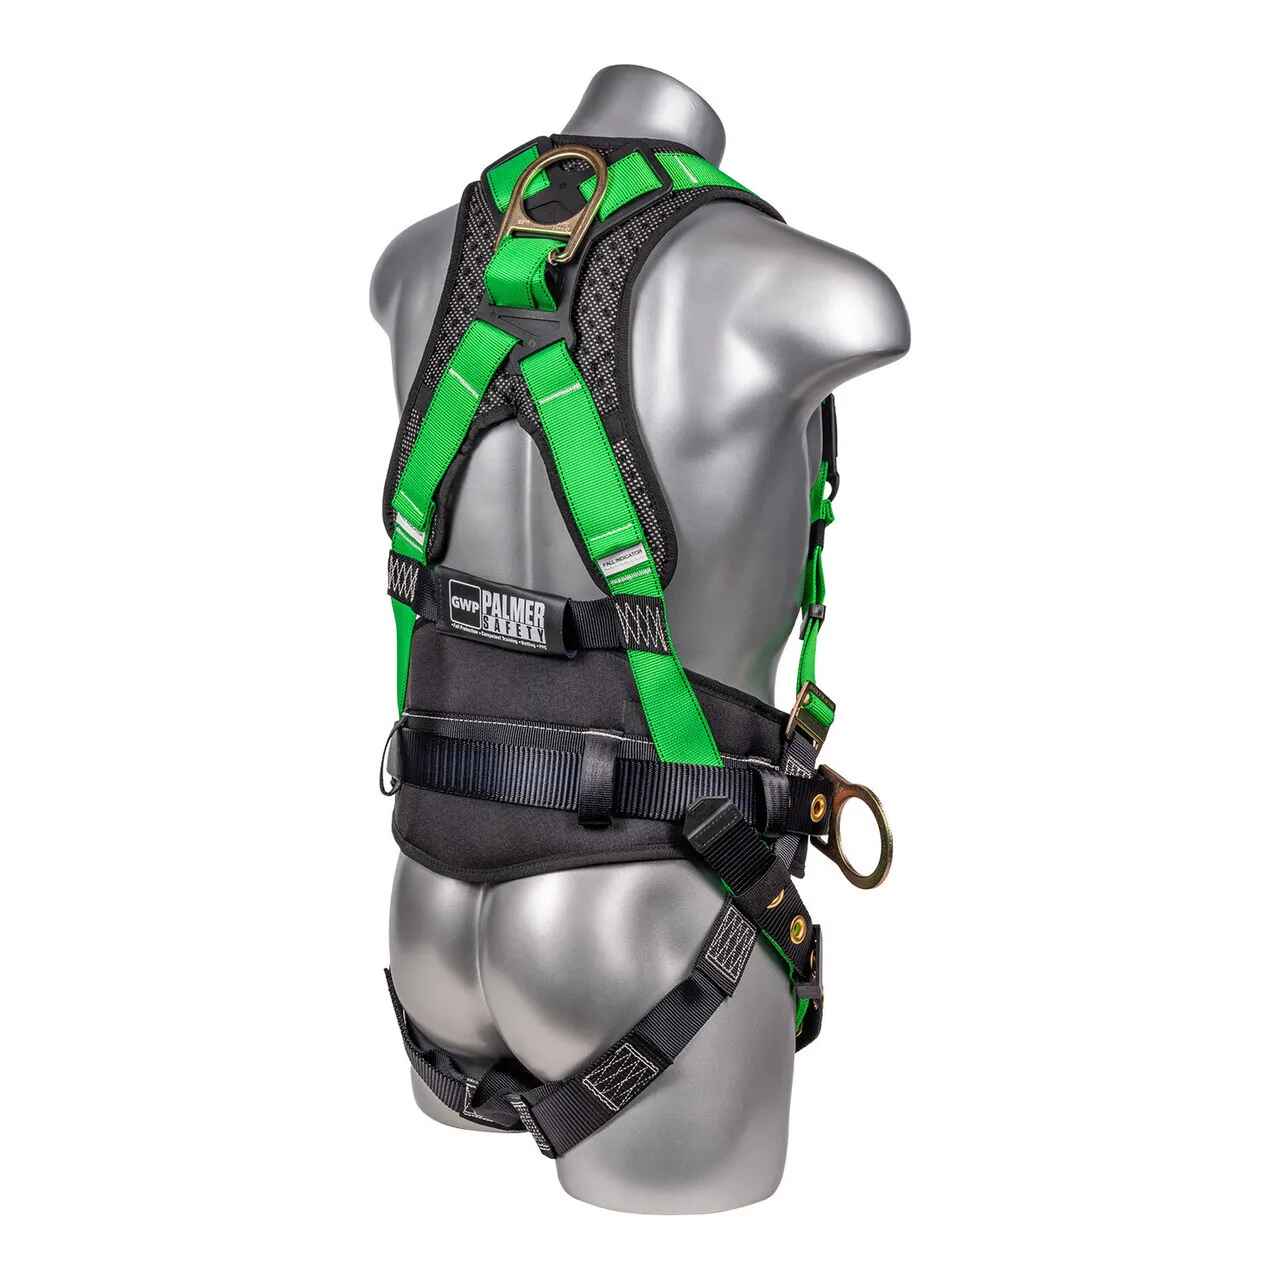 Palmer Safety ATERET Full Body point Harness, Padded Back Support,  Quick-Connect Buckle, Grommet Legs, Back＆Side D-Rings, OSHA ANSI Indu 並行輸入品  登山、クライミング用品